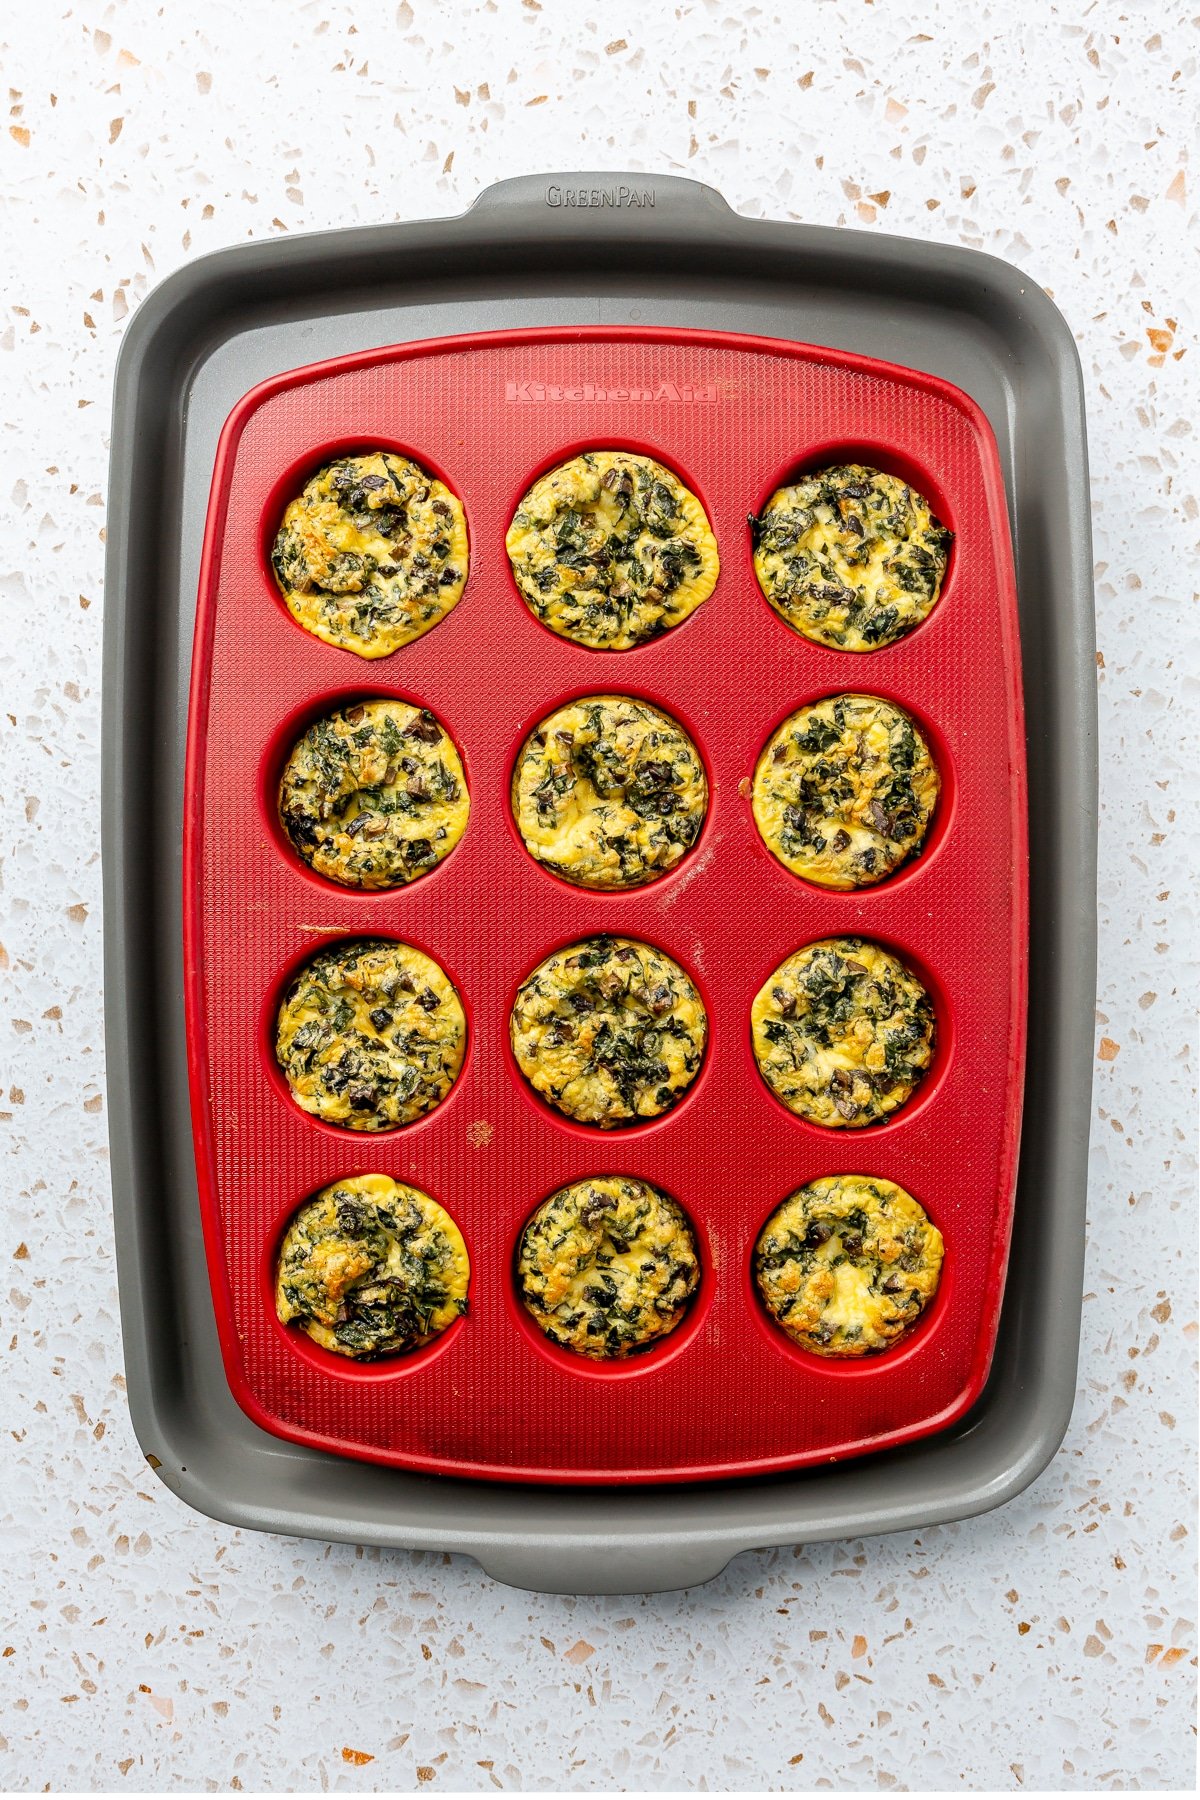 Fully baked egg bites sit in a red muffin tray.